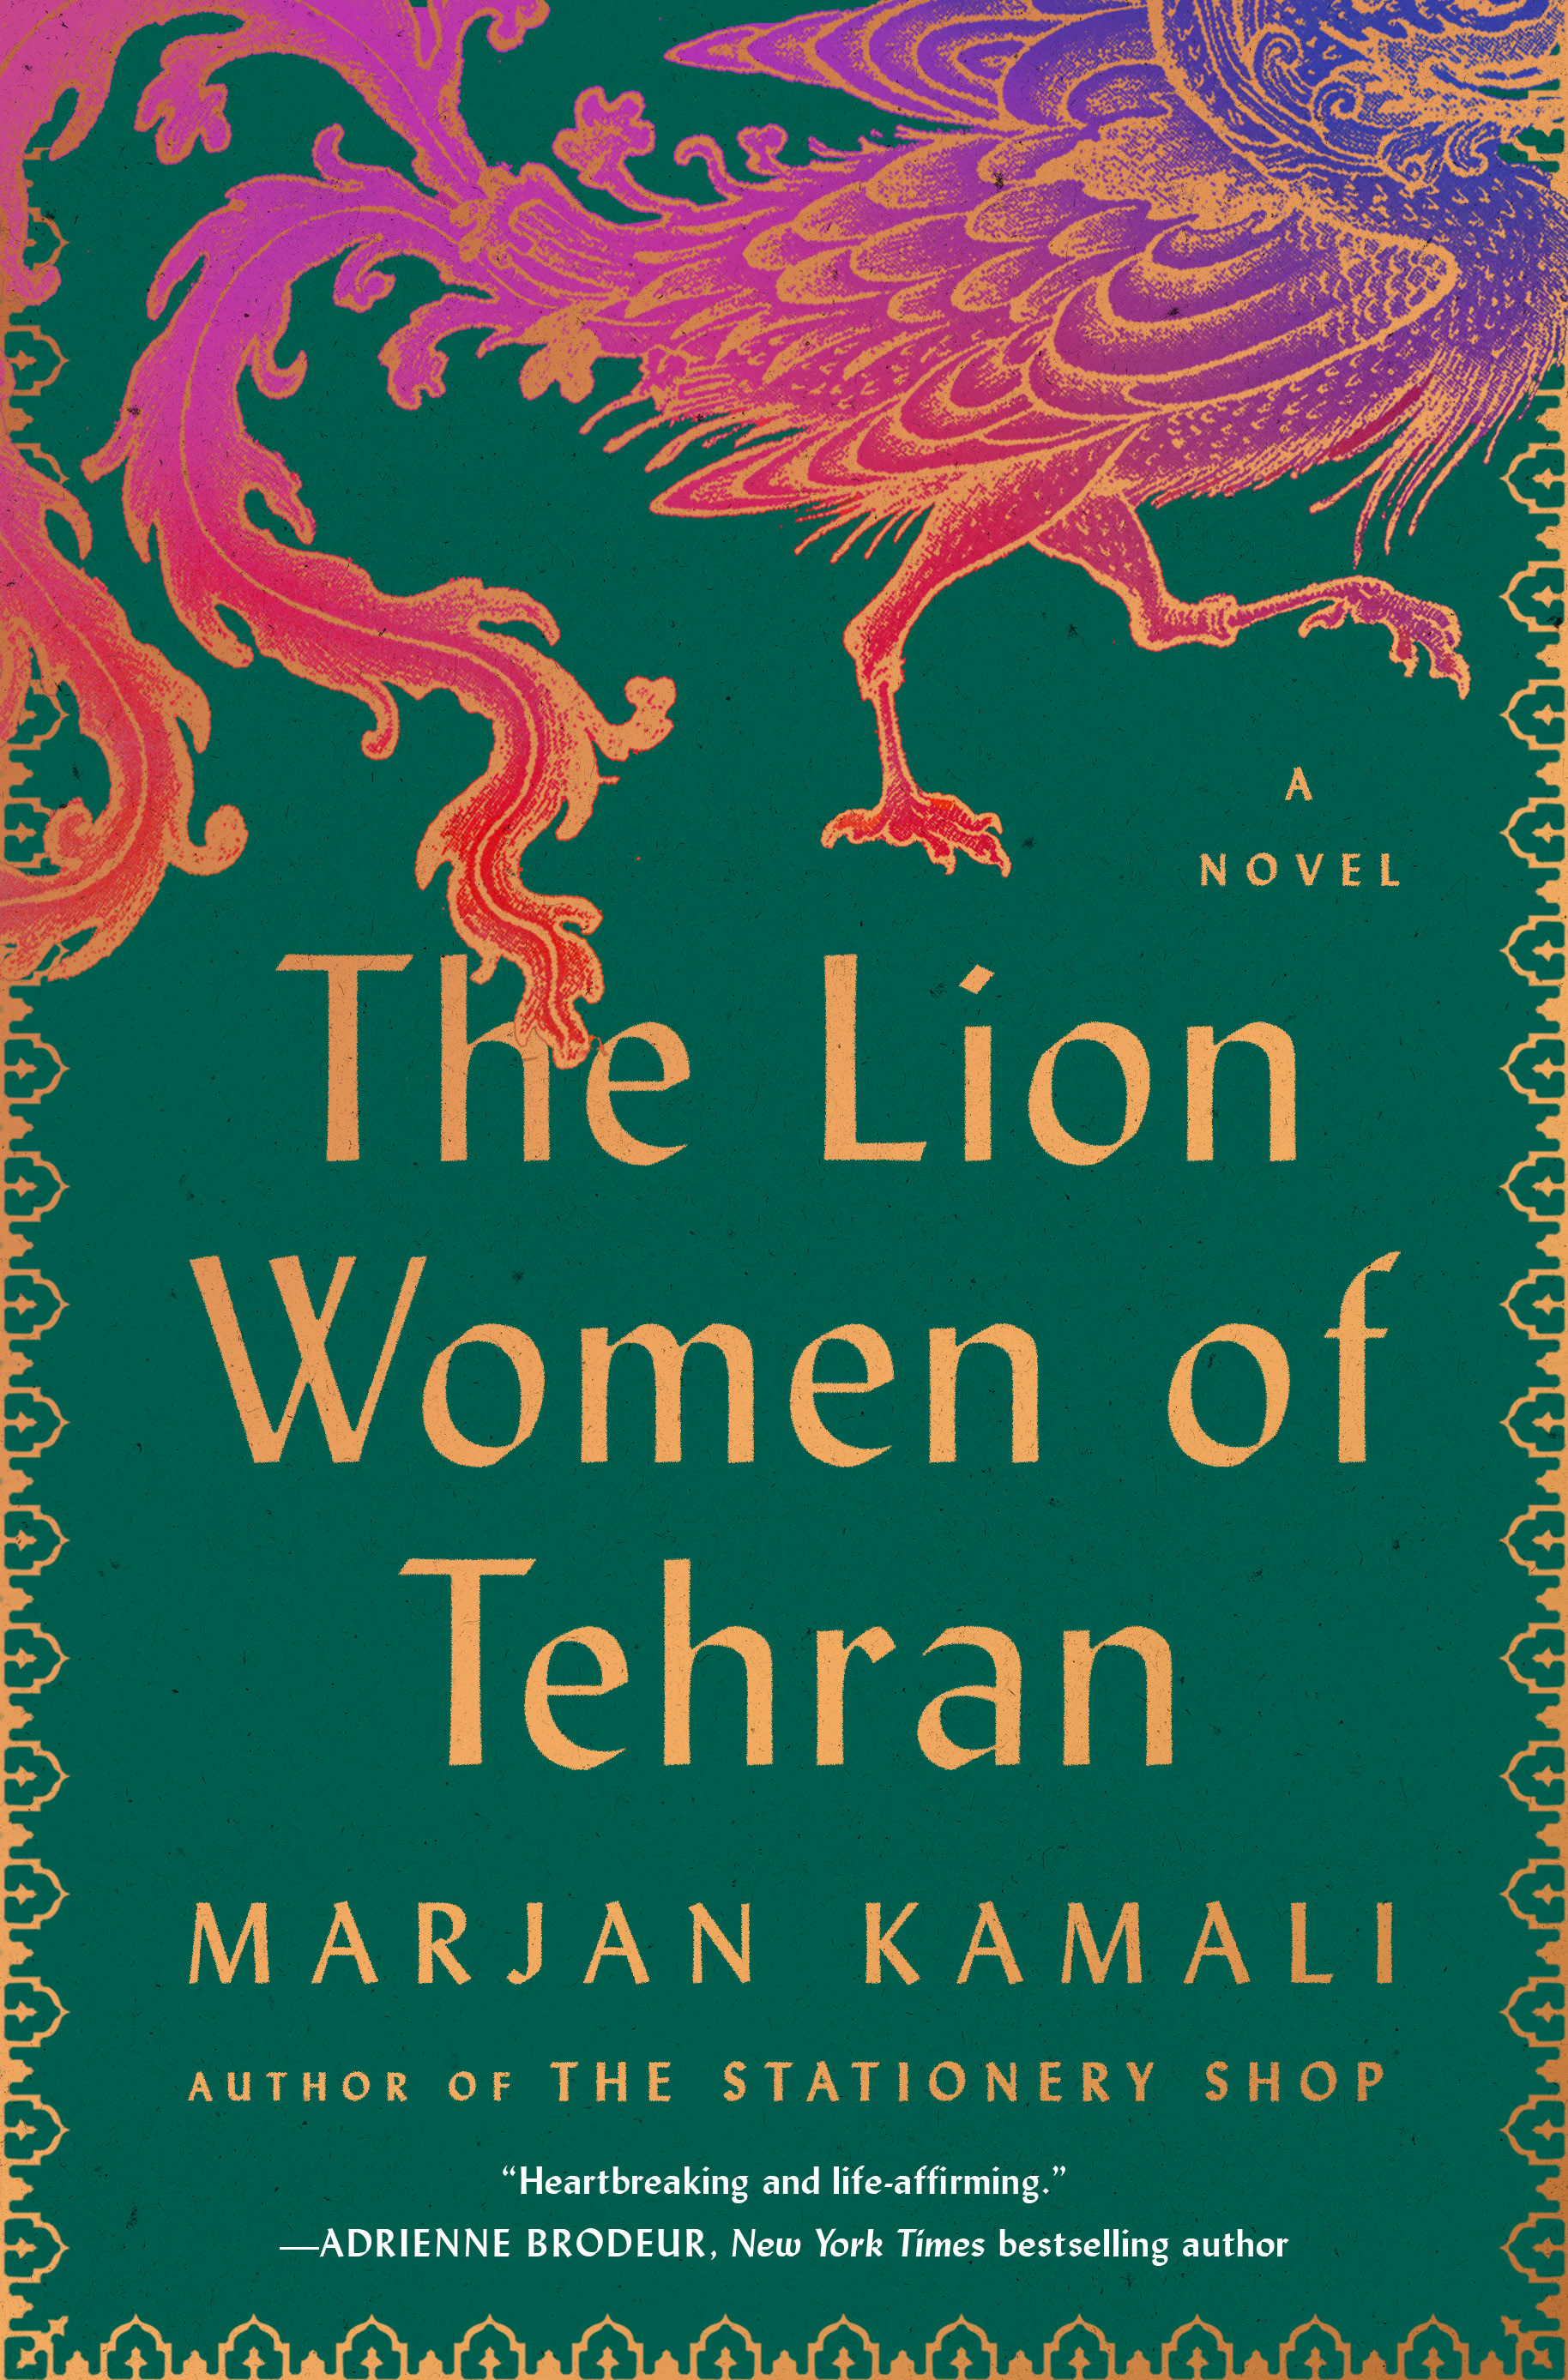 Image for "The Lion Women of Tehran"